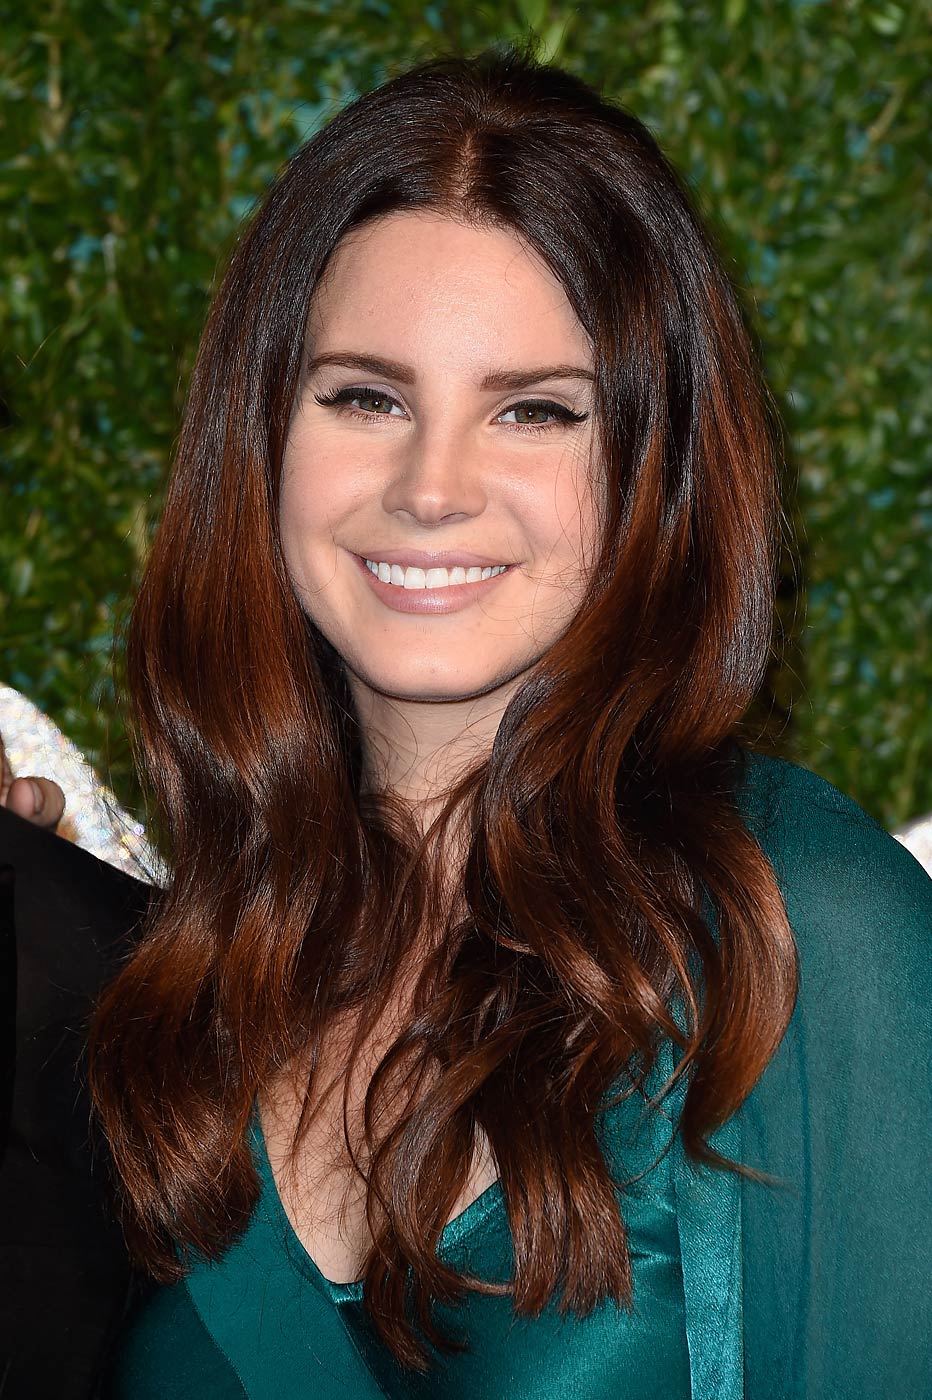 Lana del Rey attends the British Fashion Awards at London Coliseum on December 1, 2014 in London, England. (Pascal Le Segretain—Getty Images)